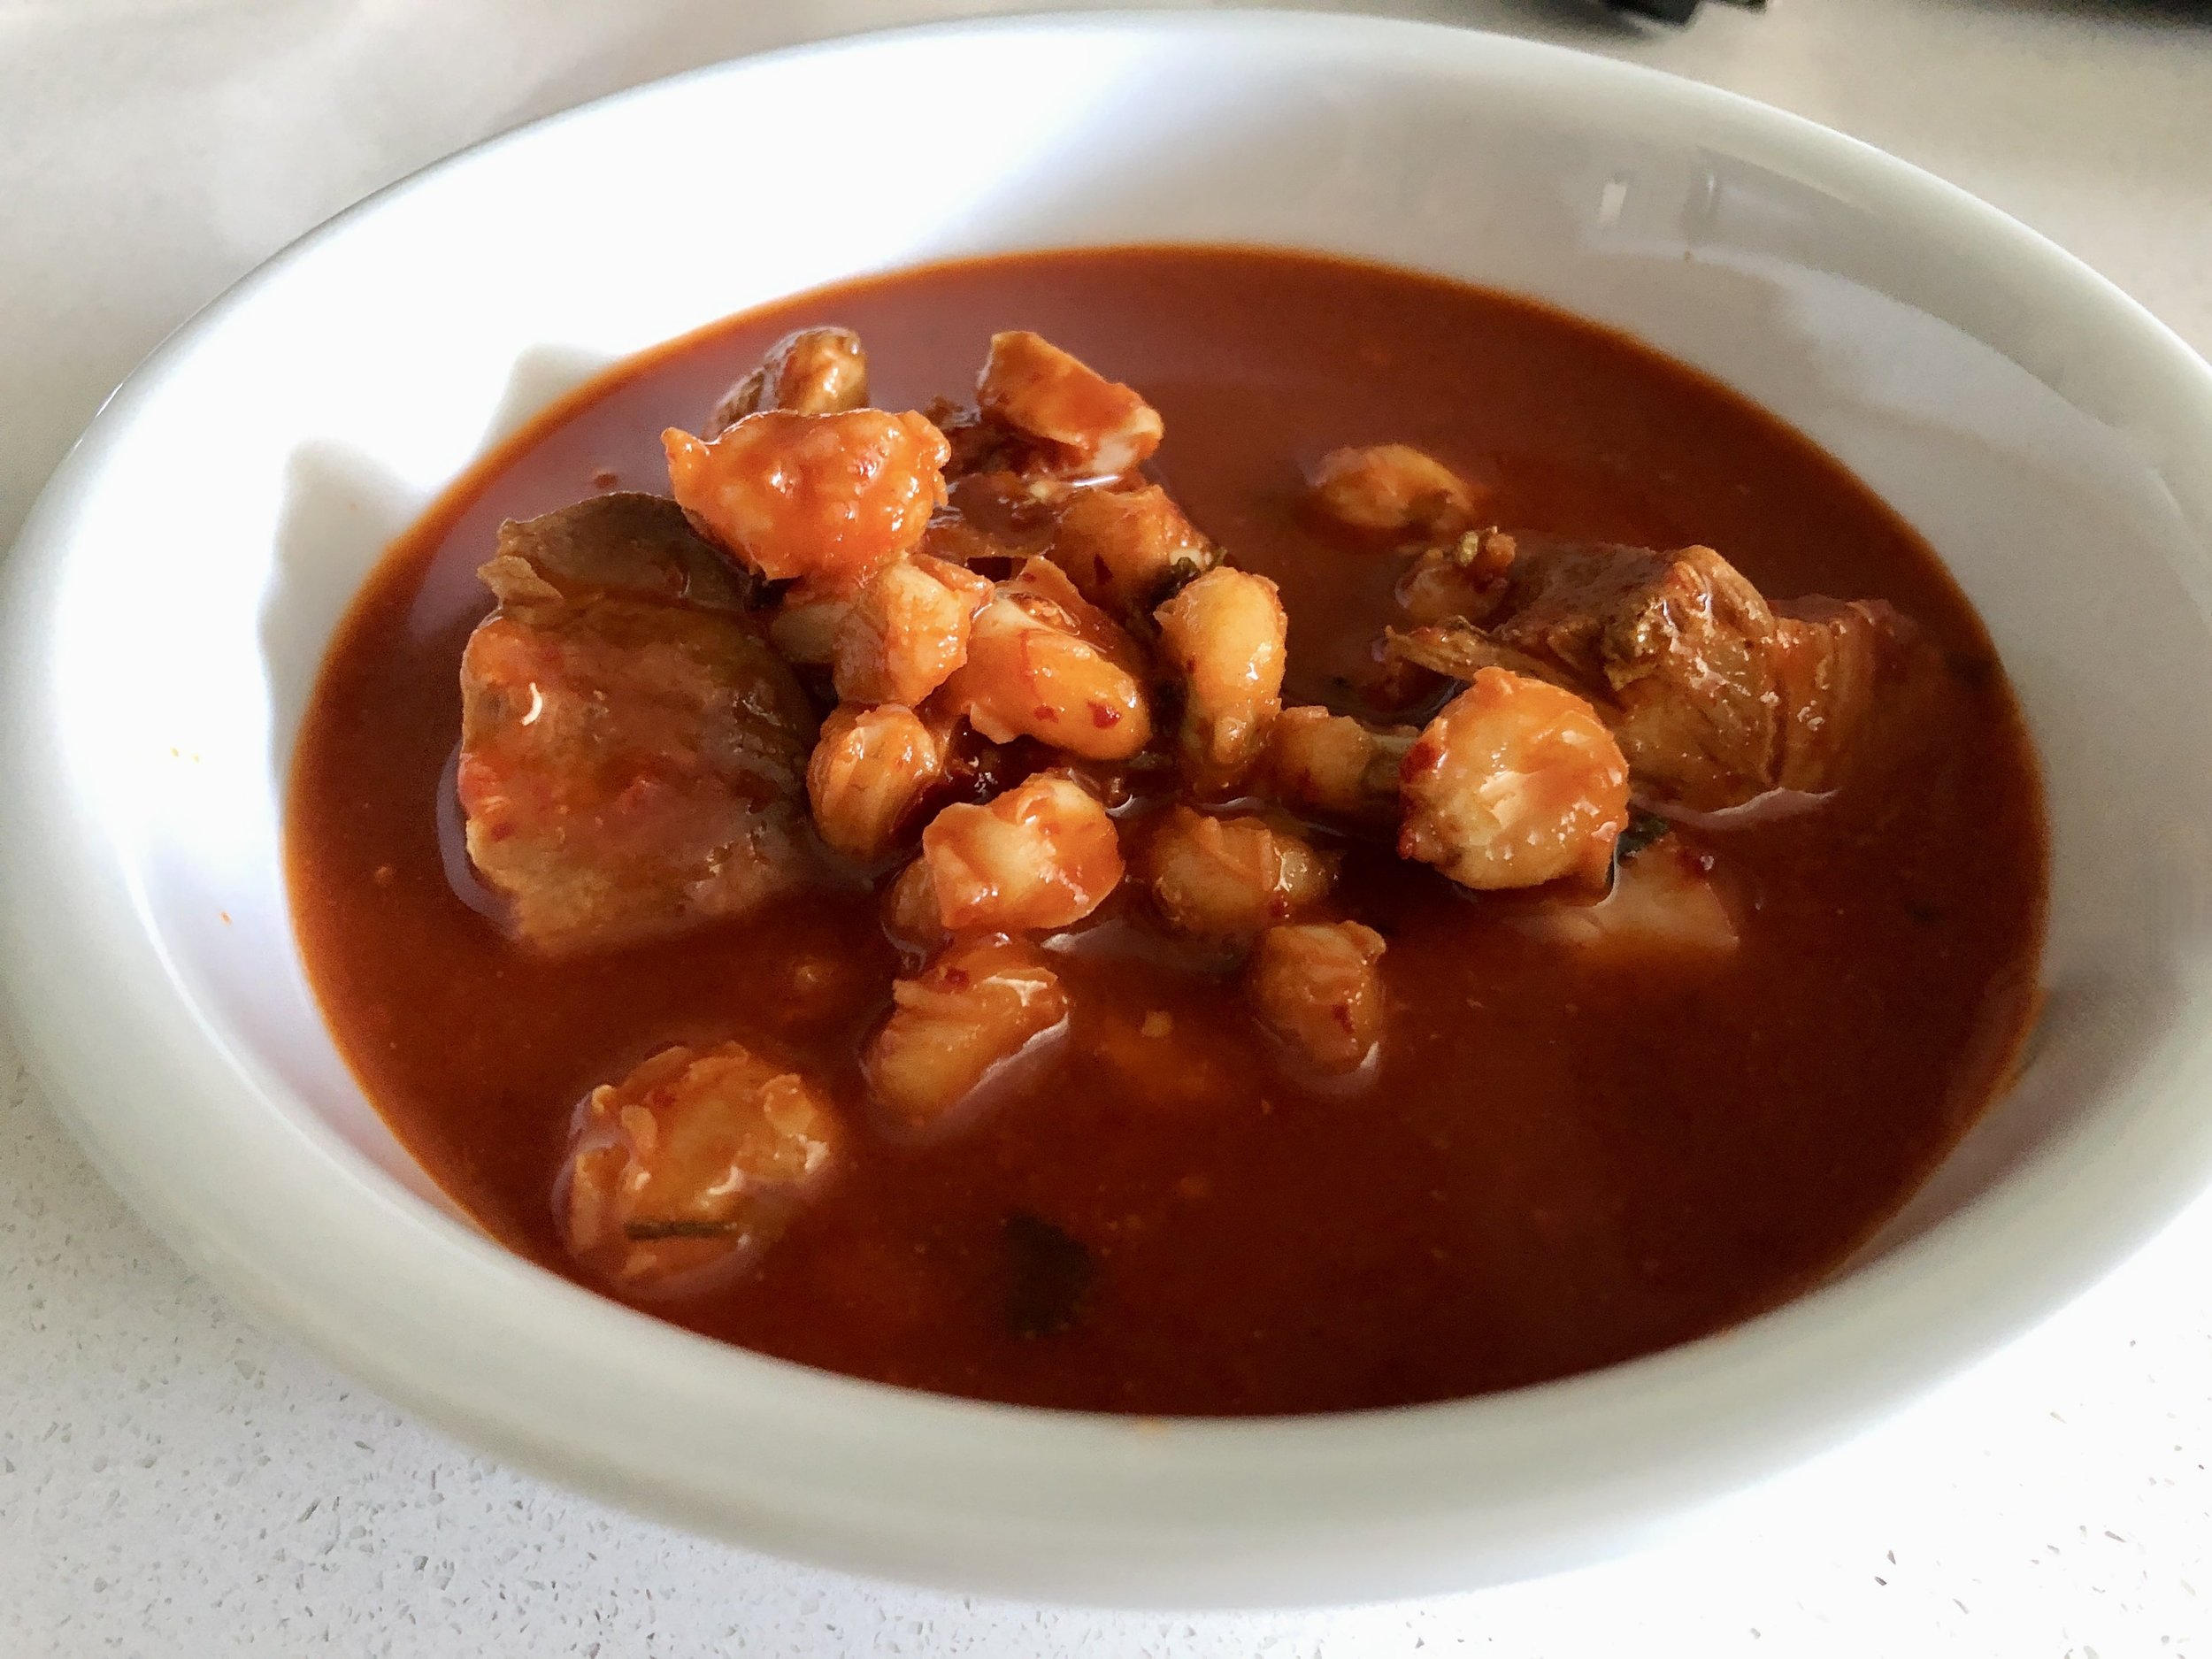 Posole can range from a liquidy soup to a more solid stew